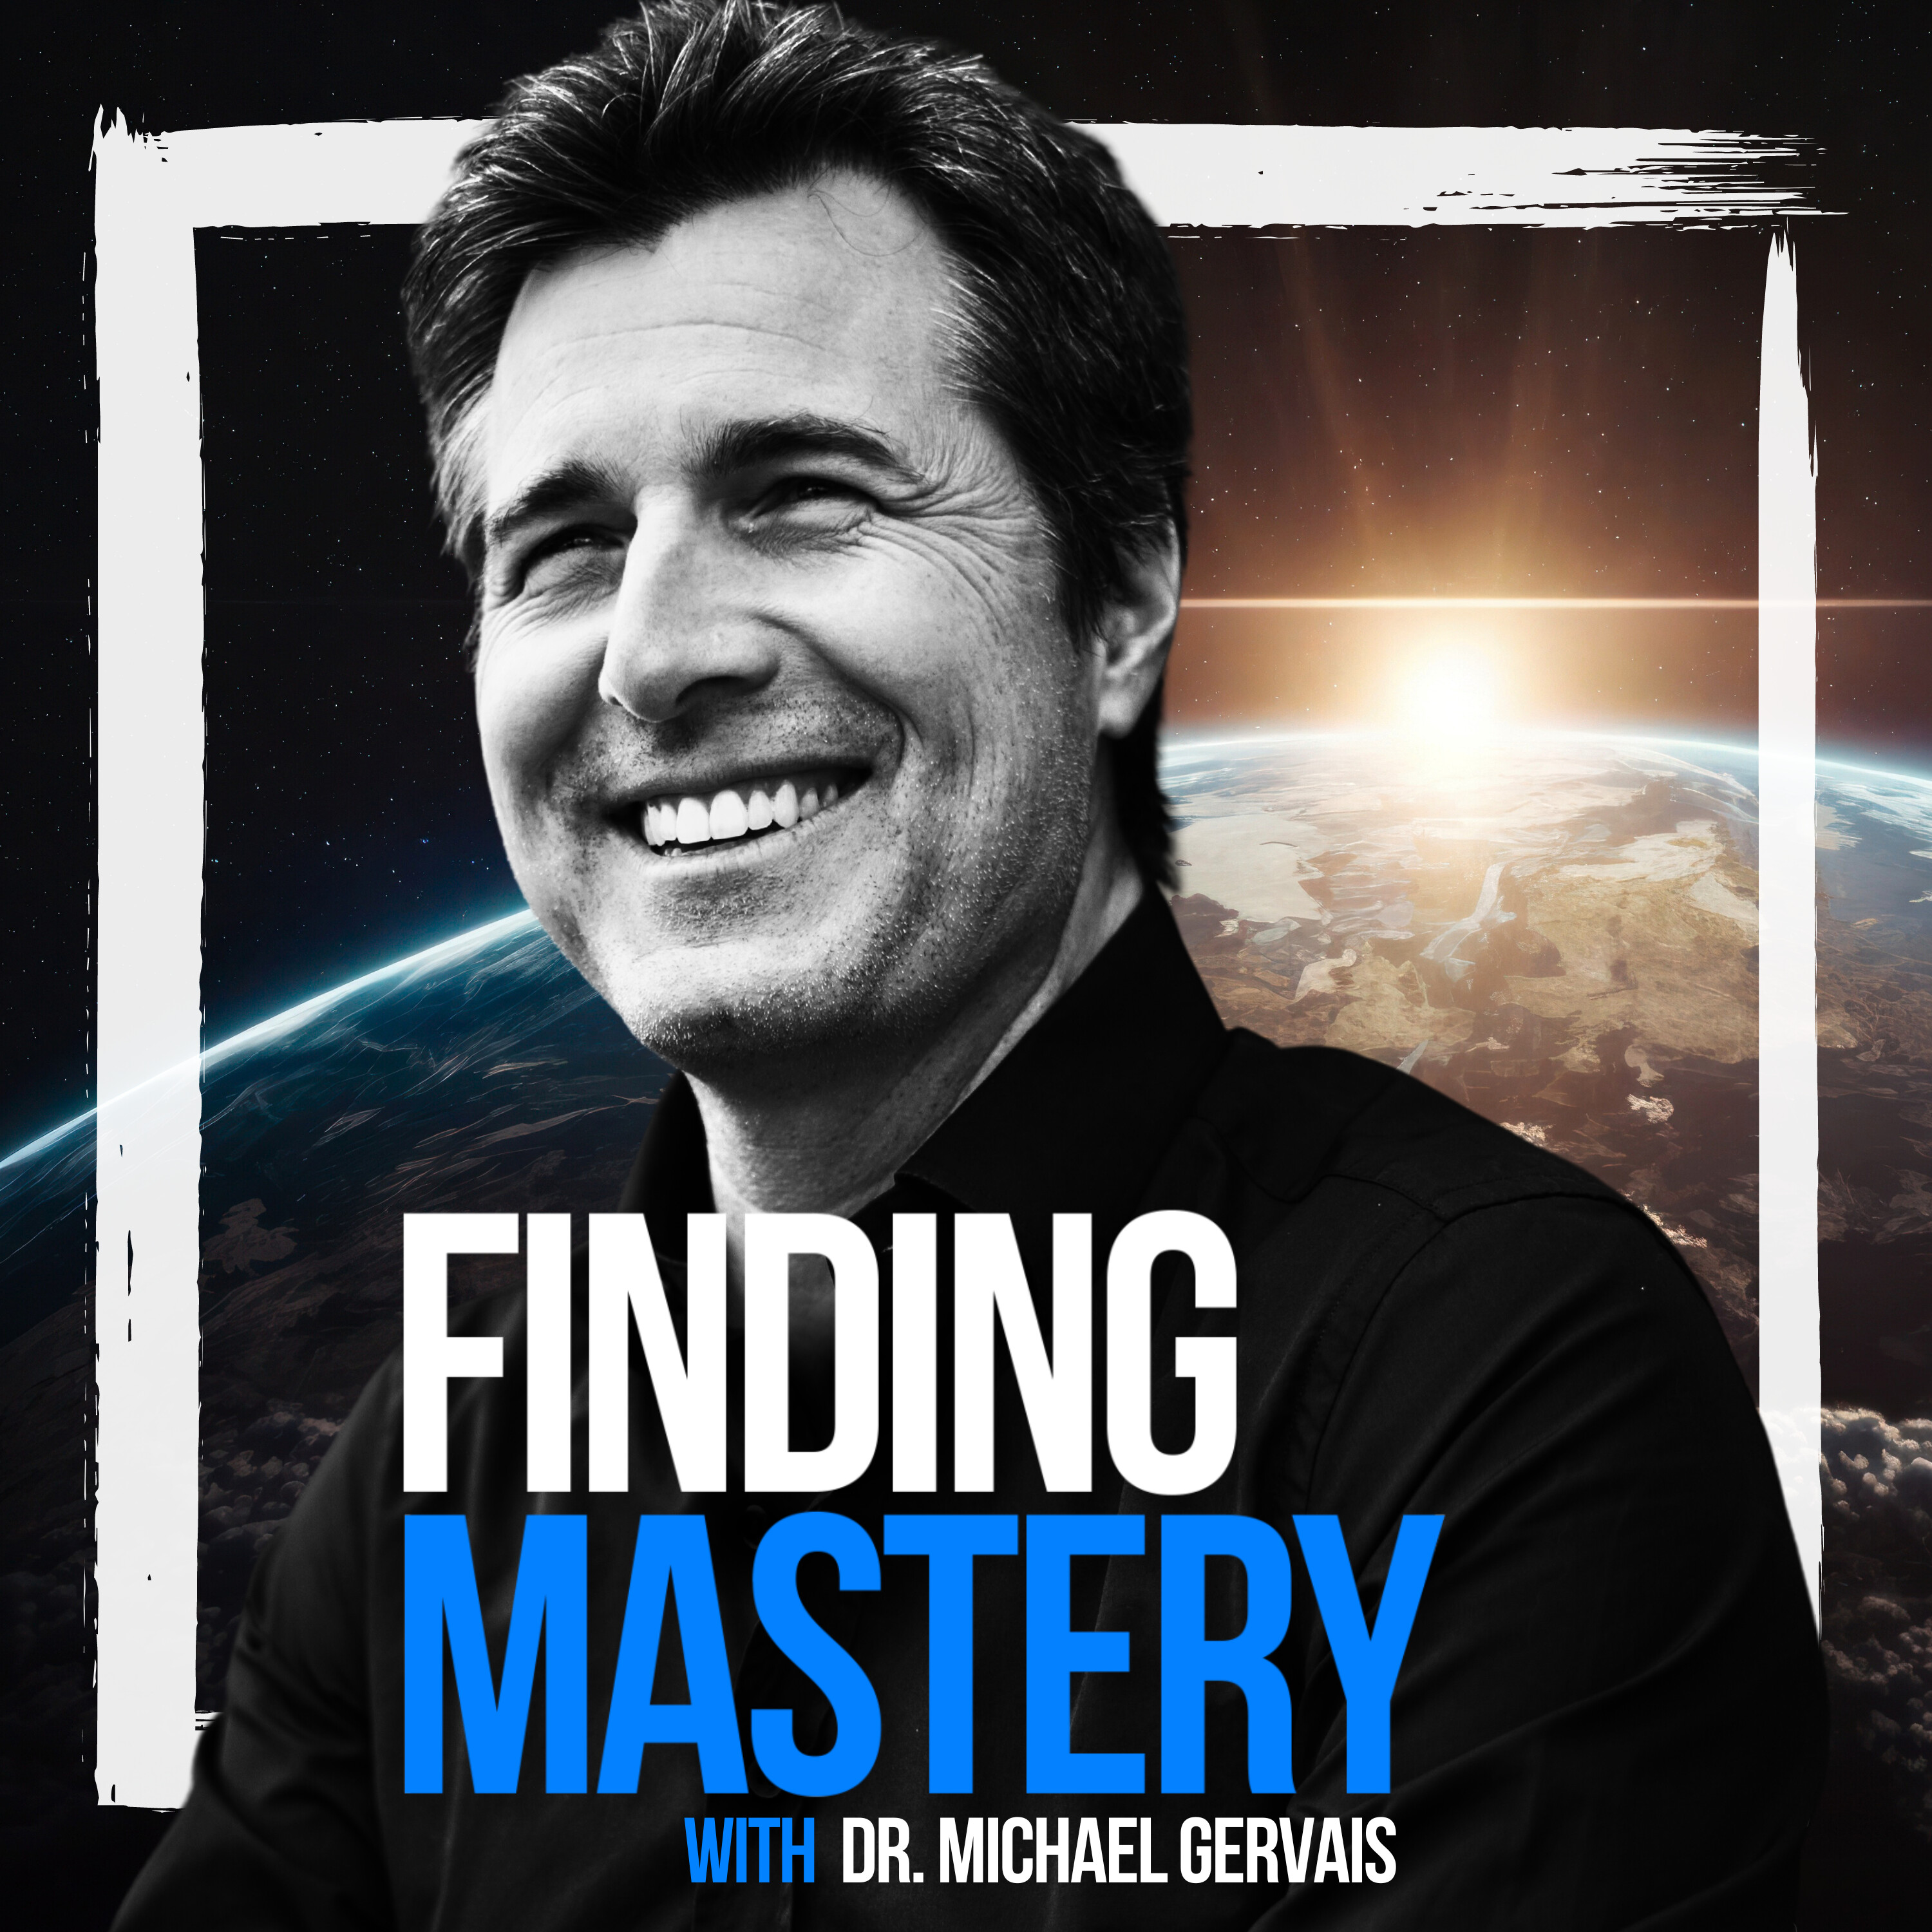 Back on Earth: Insights from 6 Months in Outer Space — NASA Astronaut Woody Hoburg | Finding Mastery Goes to Space, Part 3